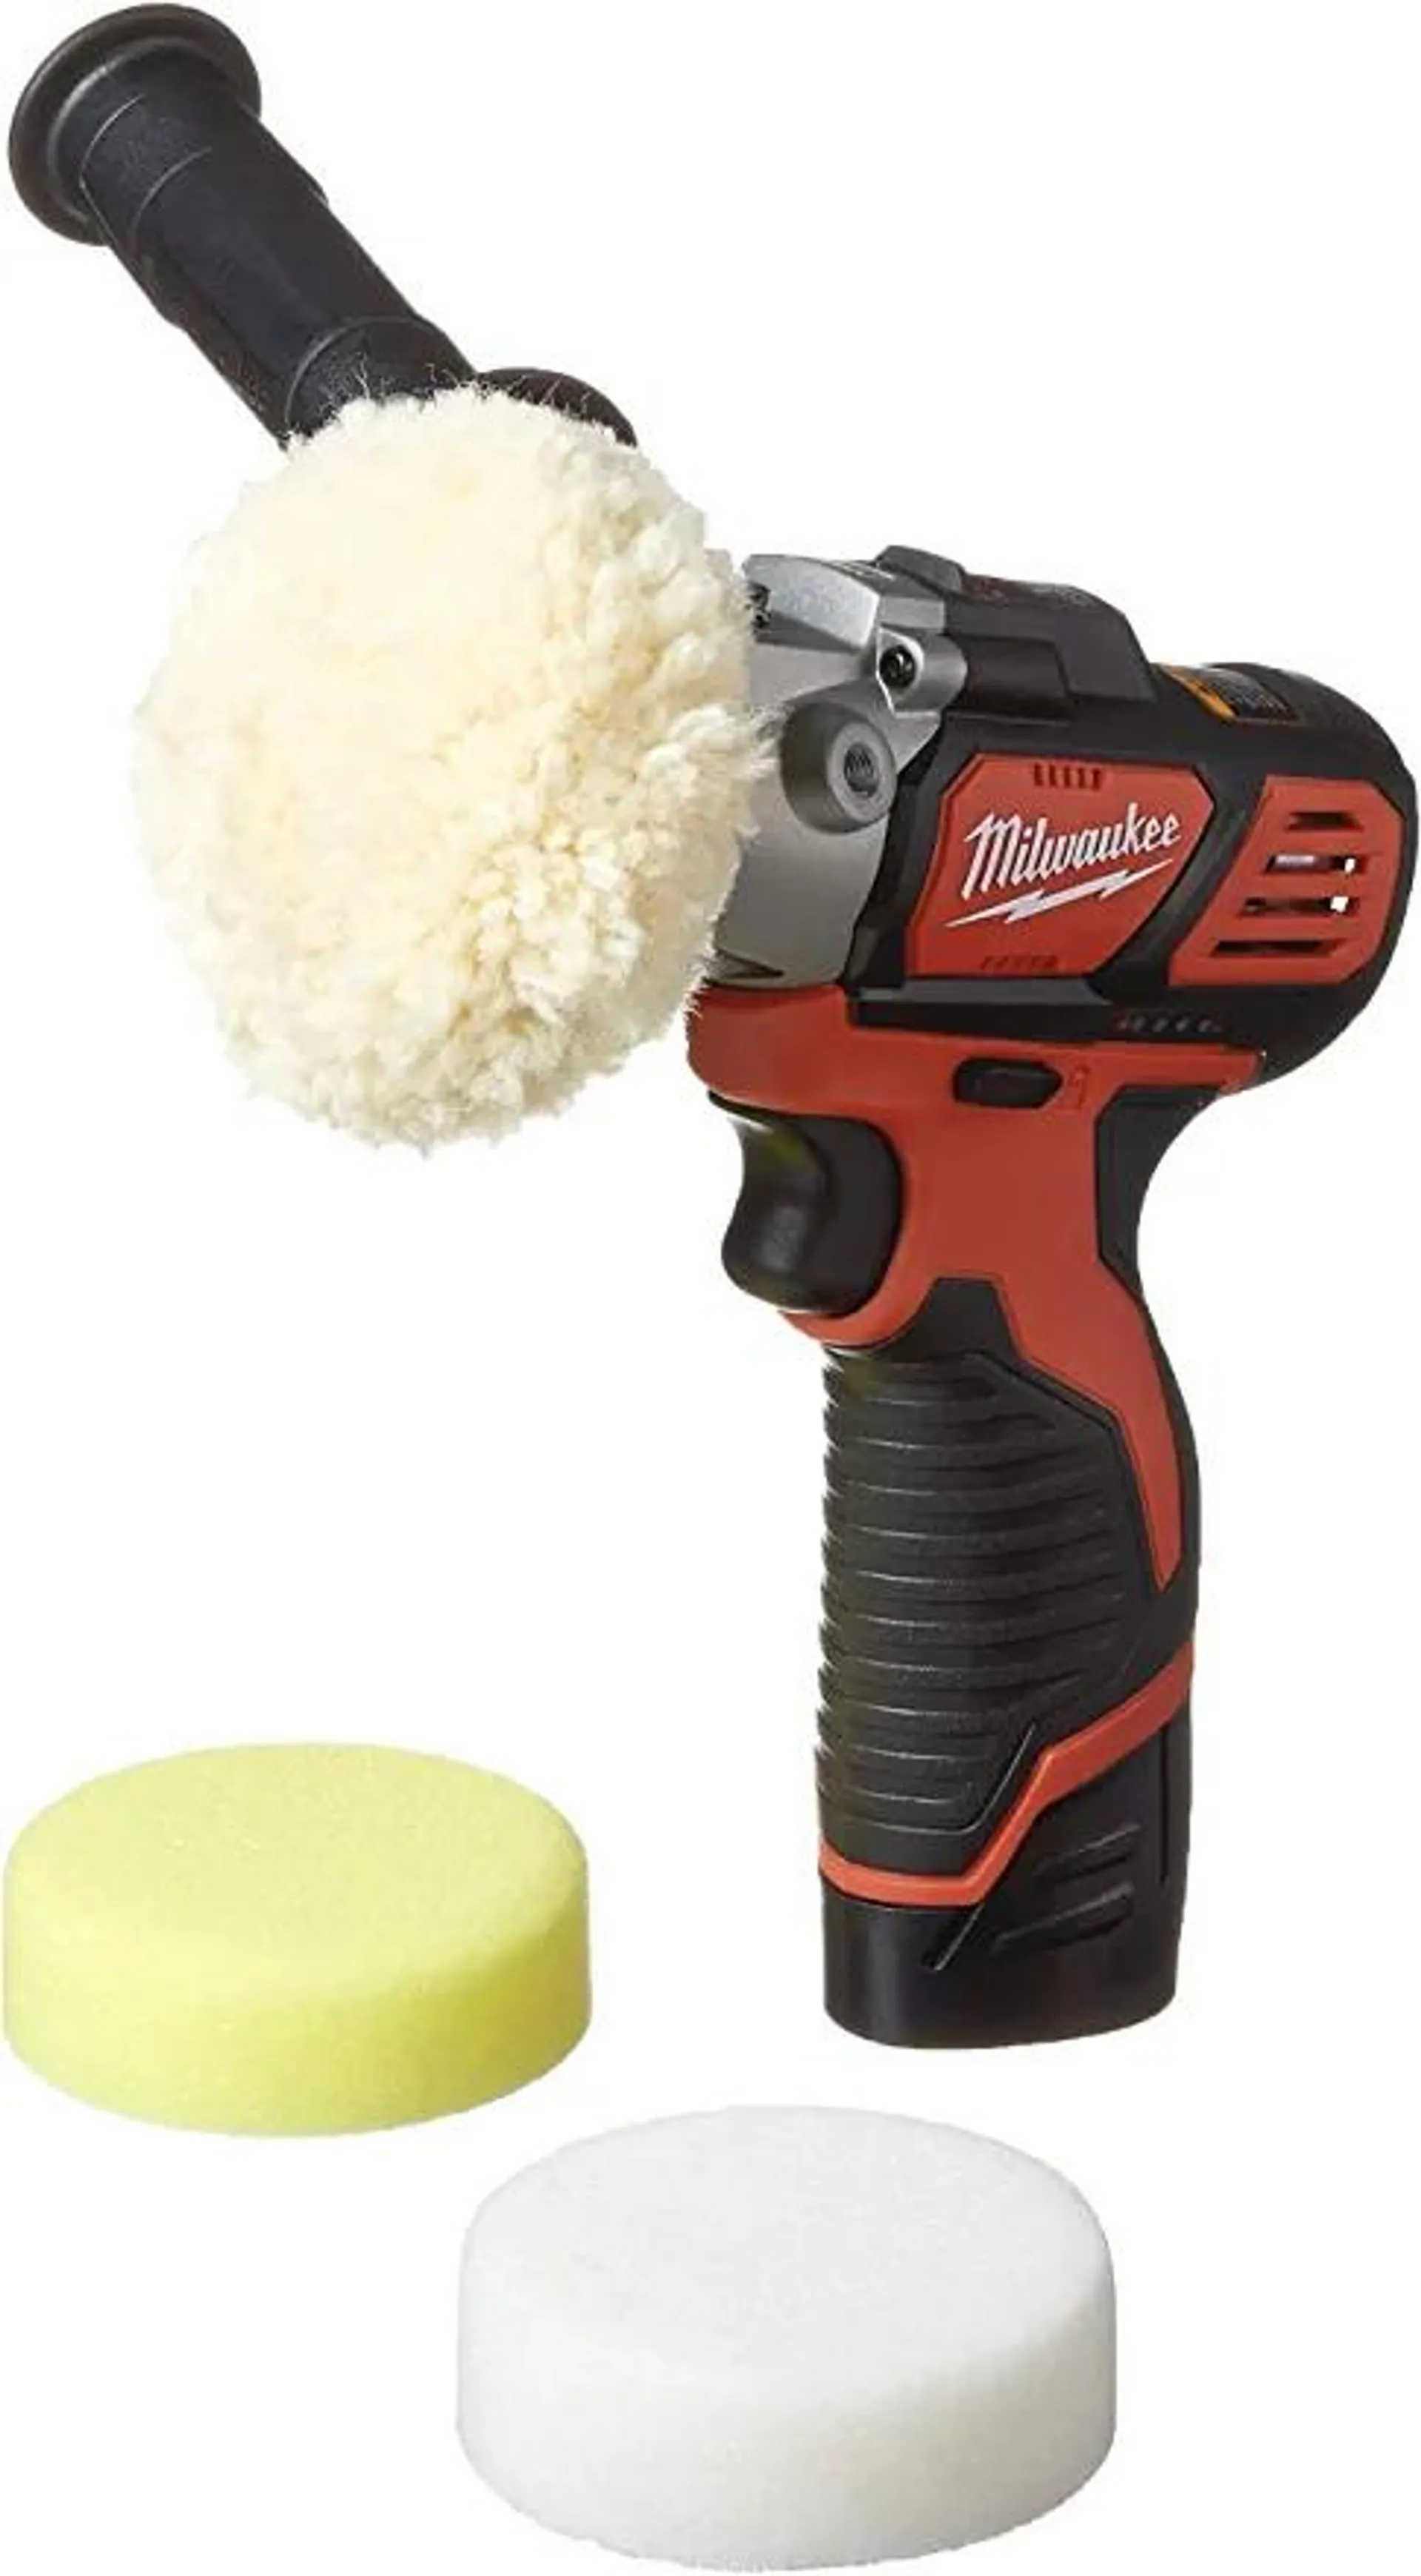 Cordless Polisher, No Battery Included